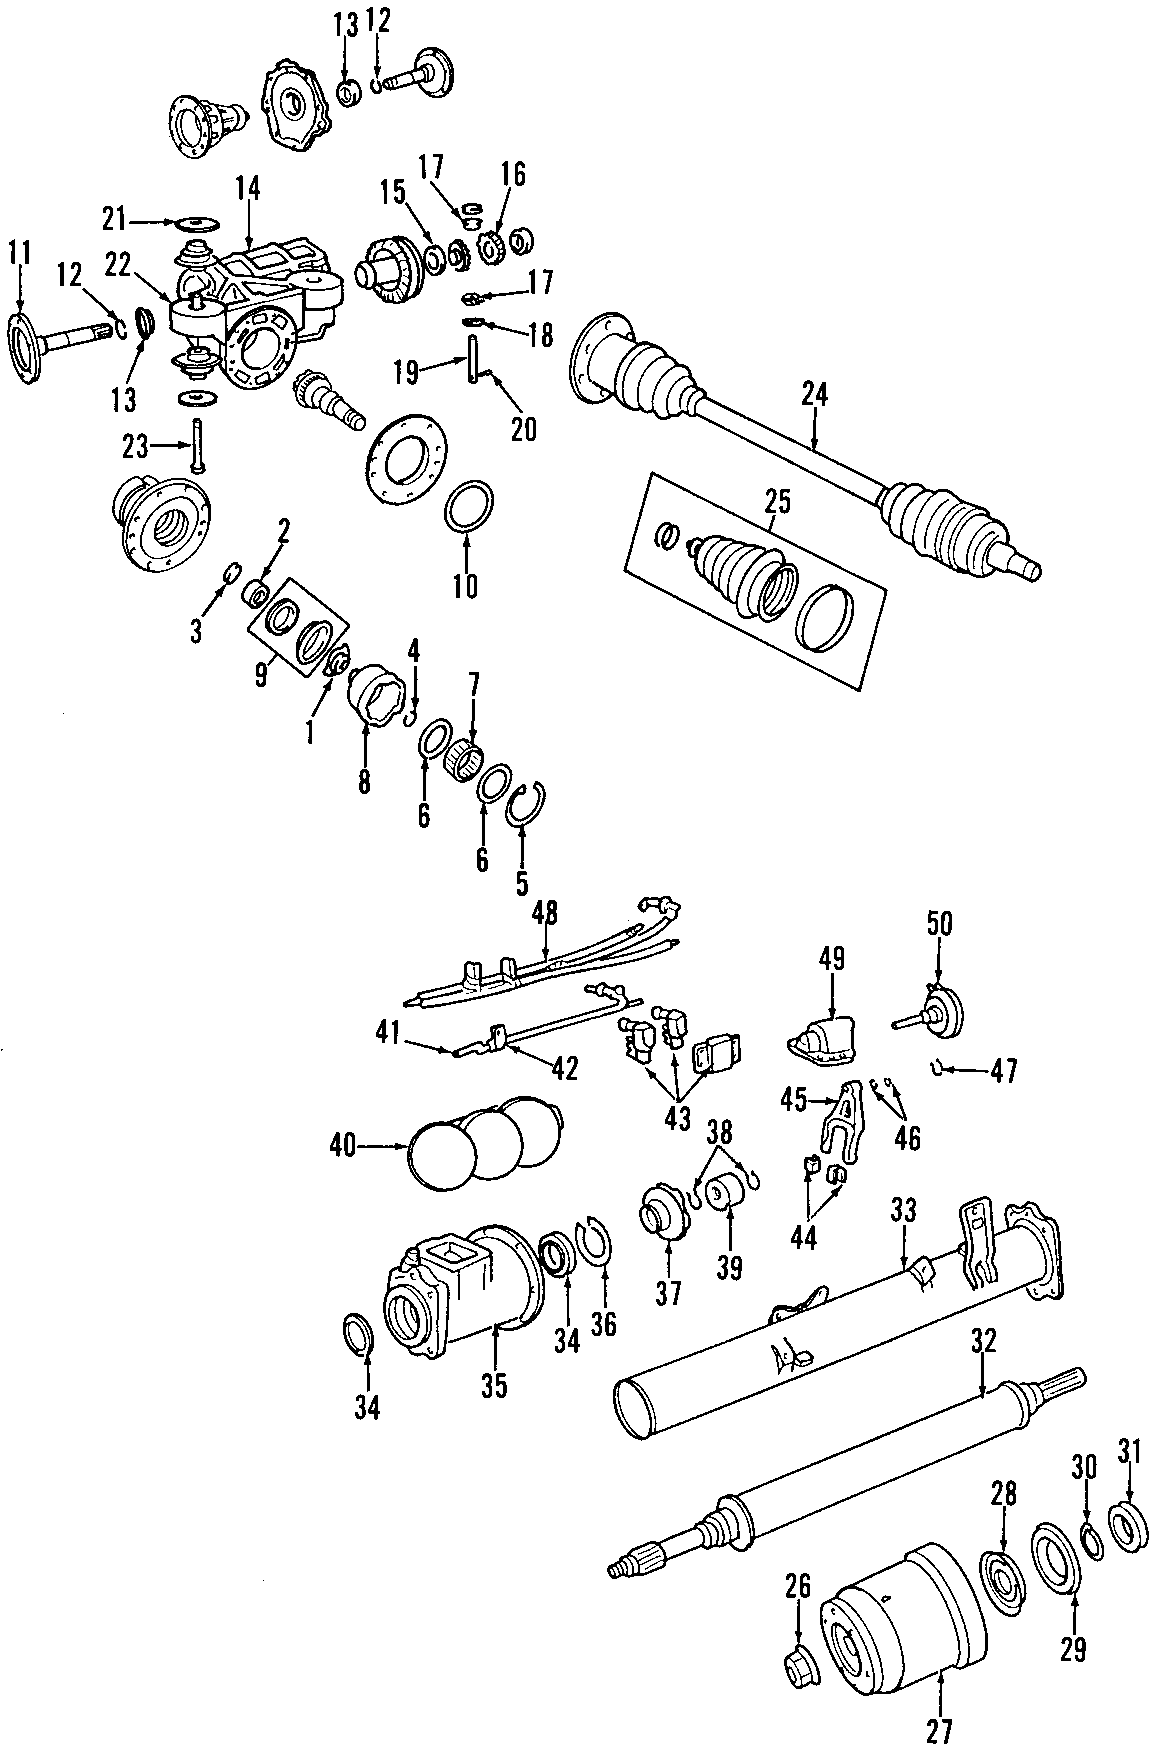 16DRIVE AXLES. REAR AXLE. AXLE SHAFTS & JOINTS. DIFFERENTIAL. PROPELLER SHAFT.https://images.simplepart.com/images/parts/motor/fullsize/T040085.png